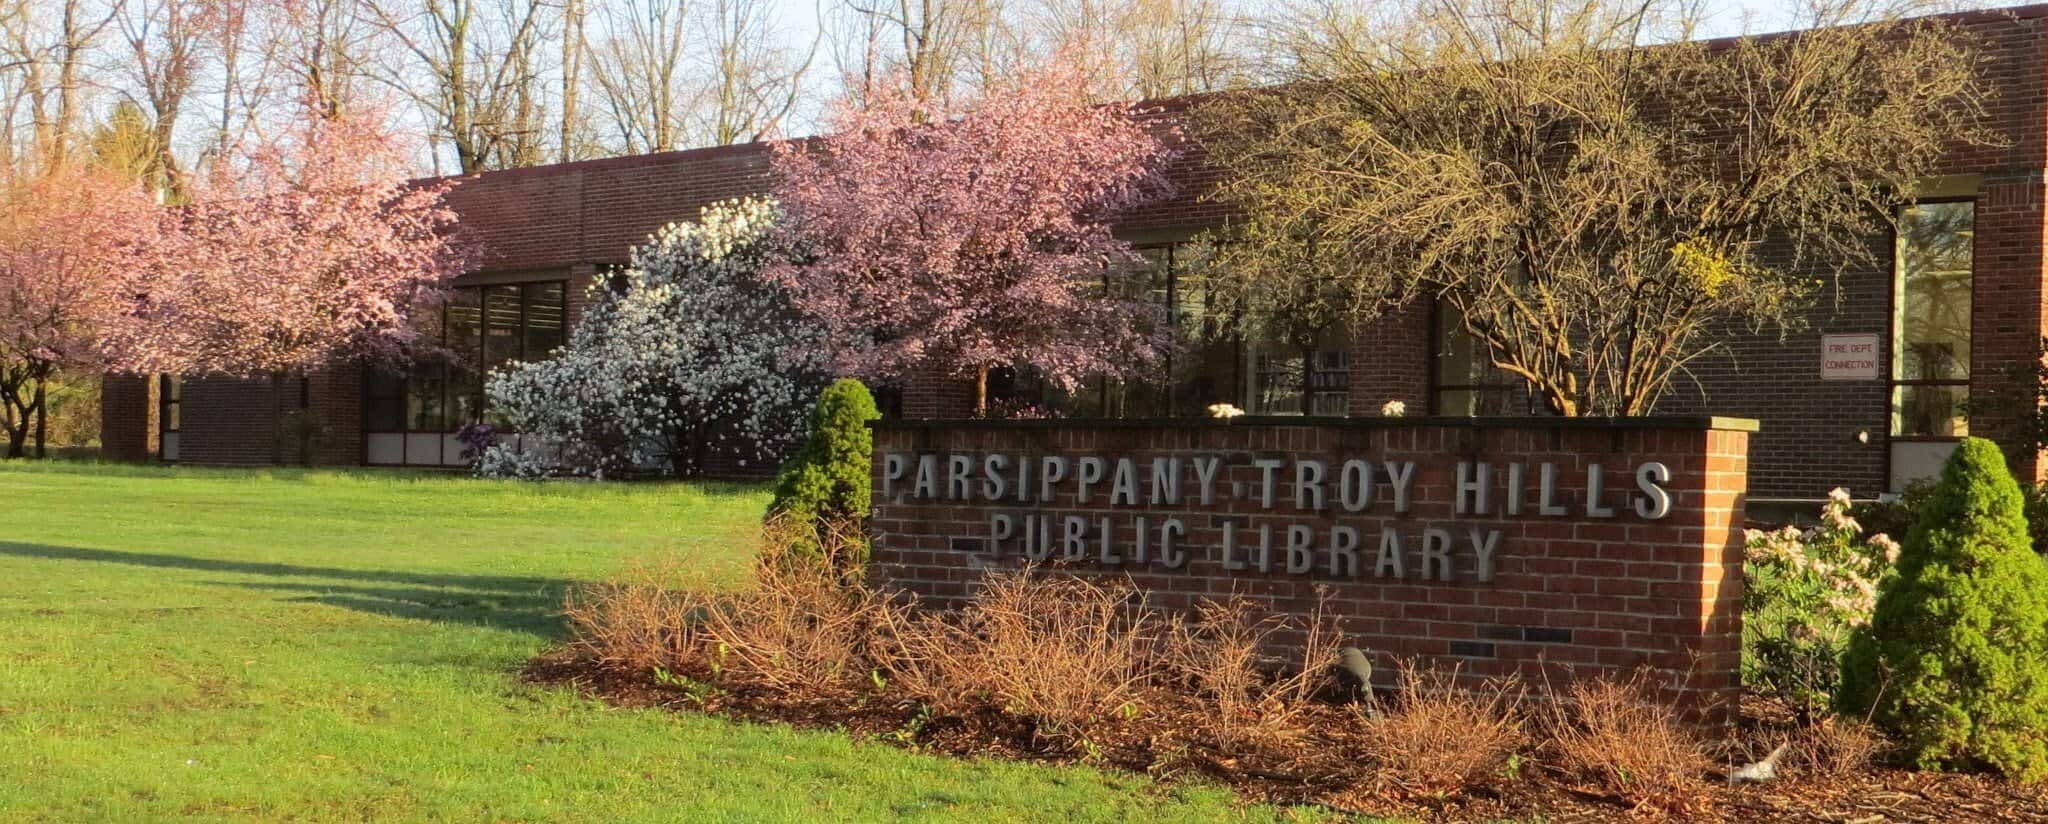 Parsippany-Troy Hills Public Library